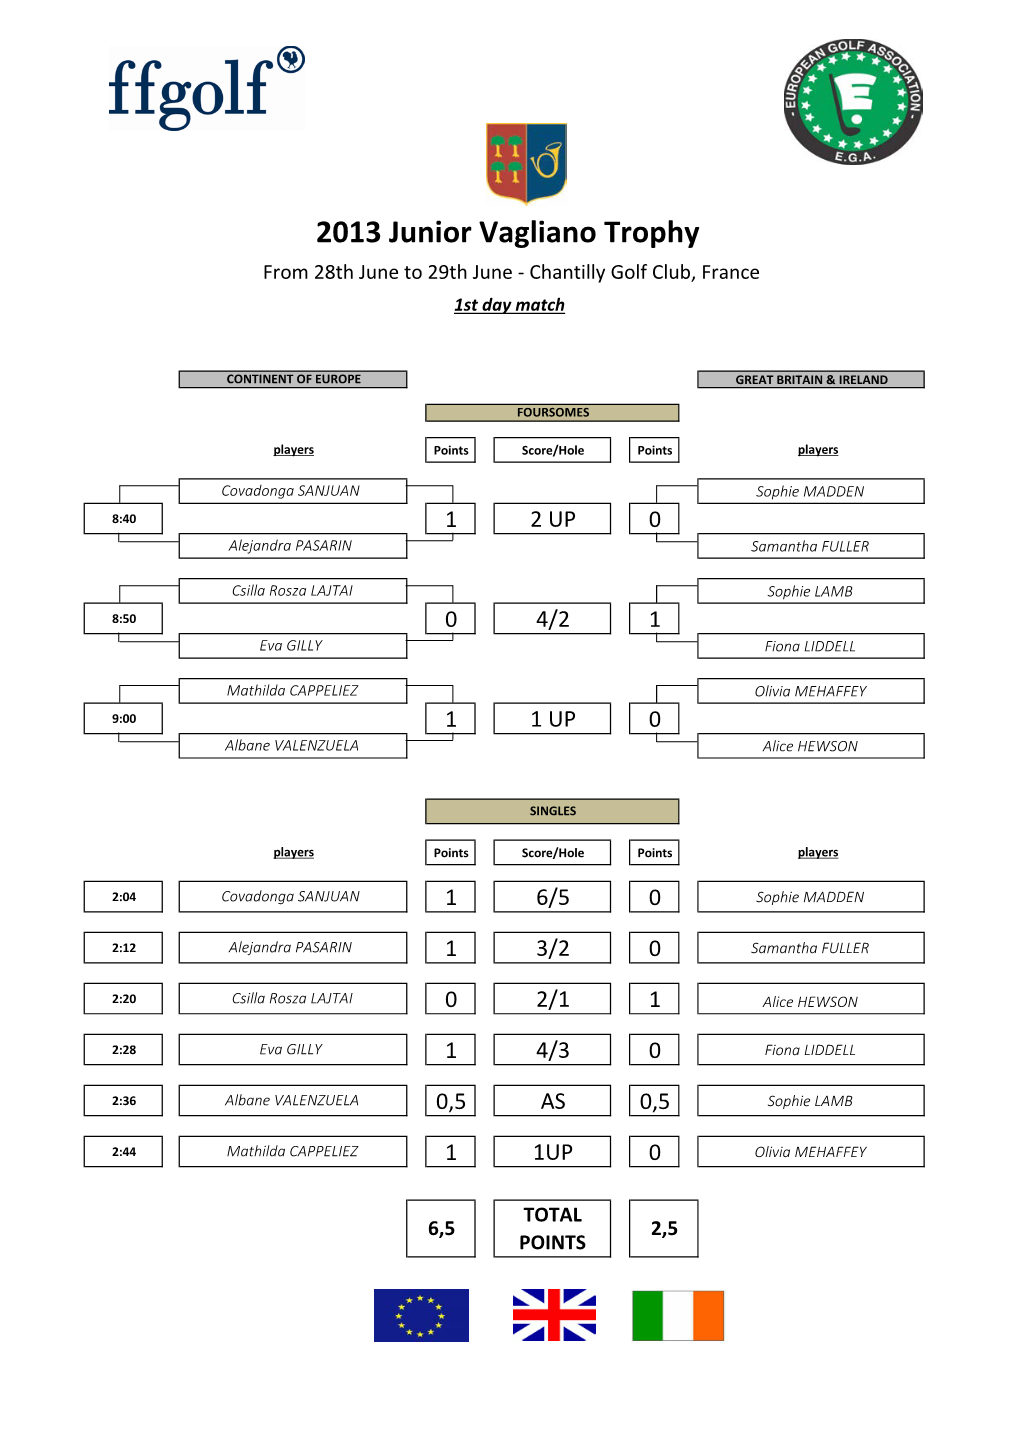 2013 Junior Vagliano Trophy from 28Th June to 29Th June - Chantilly Golf Club, France 1St Day Match